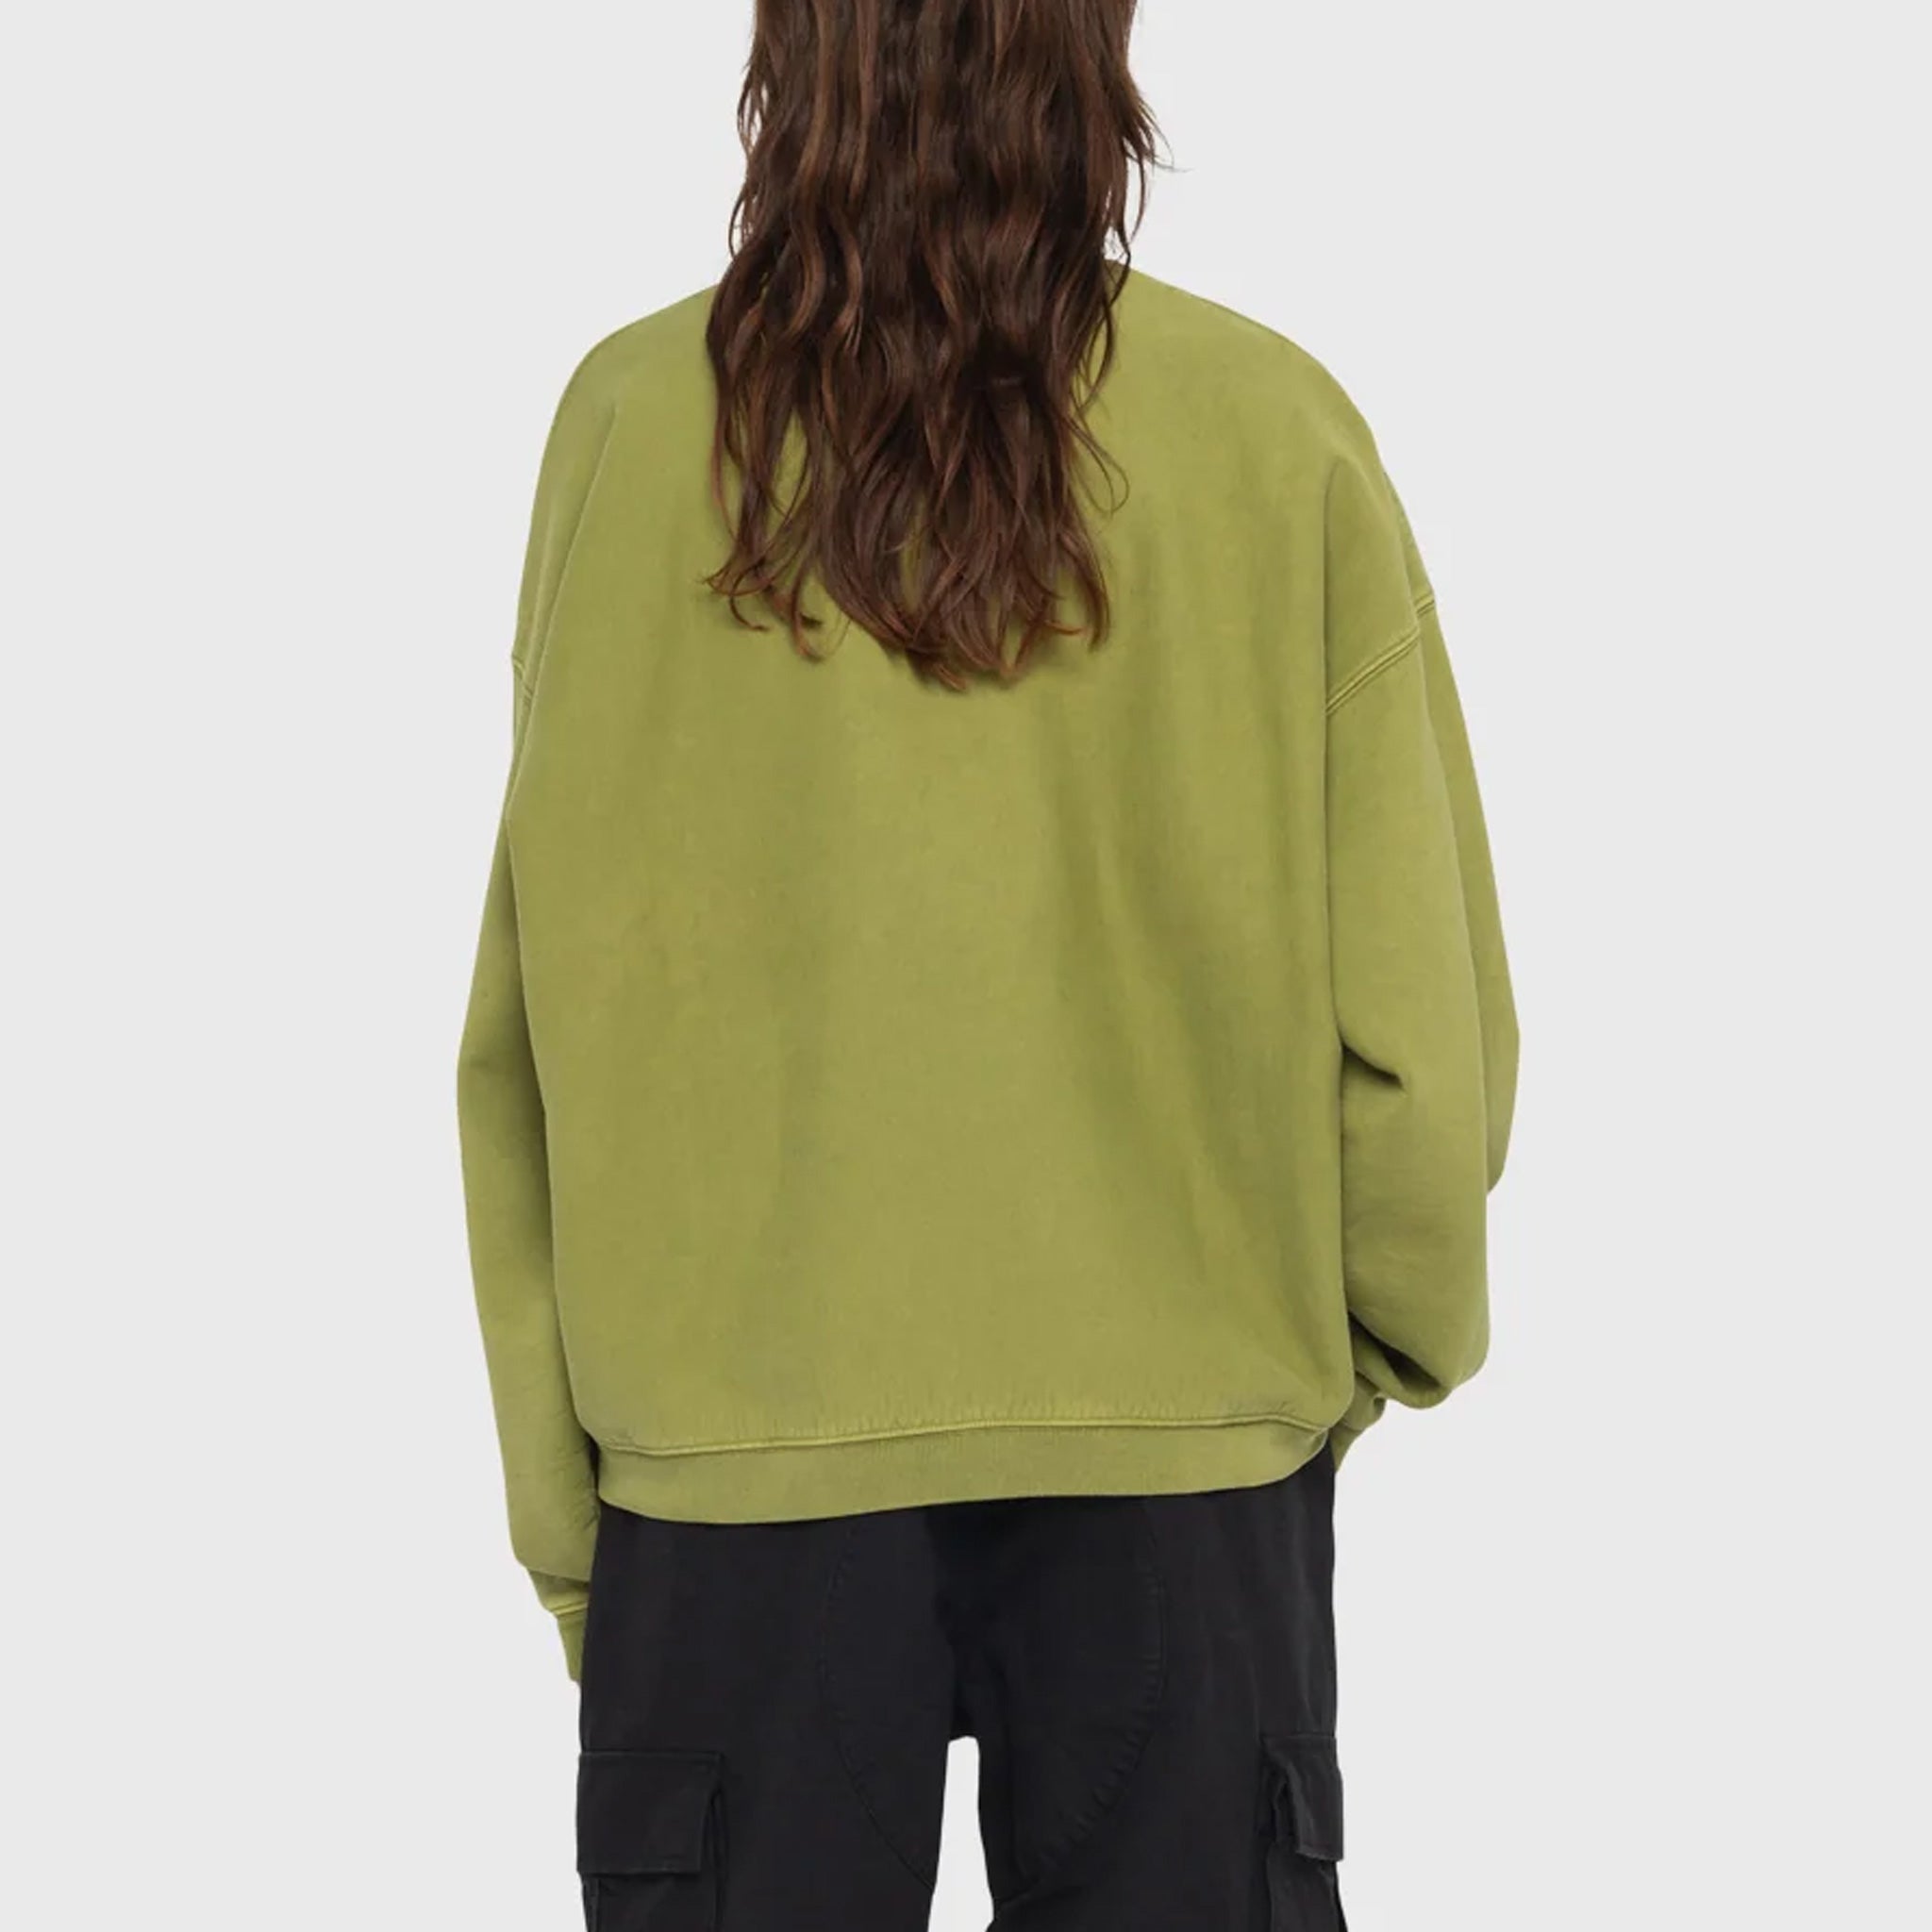 Back half body photo of model wearing a oversized stussy crewneck sweatshirt in a light green color.